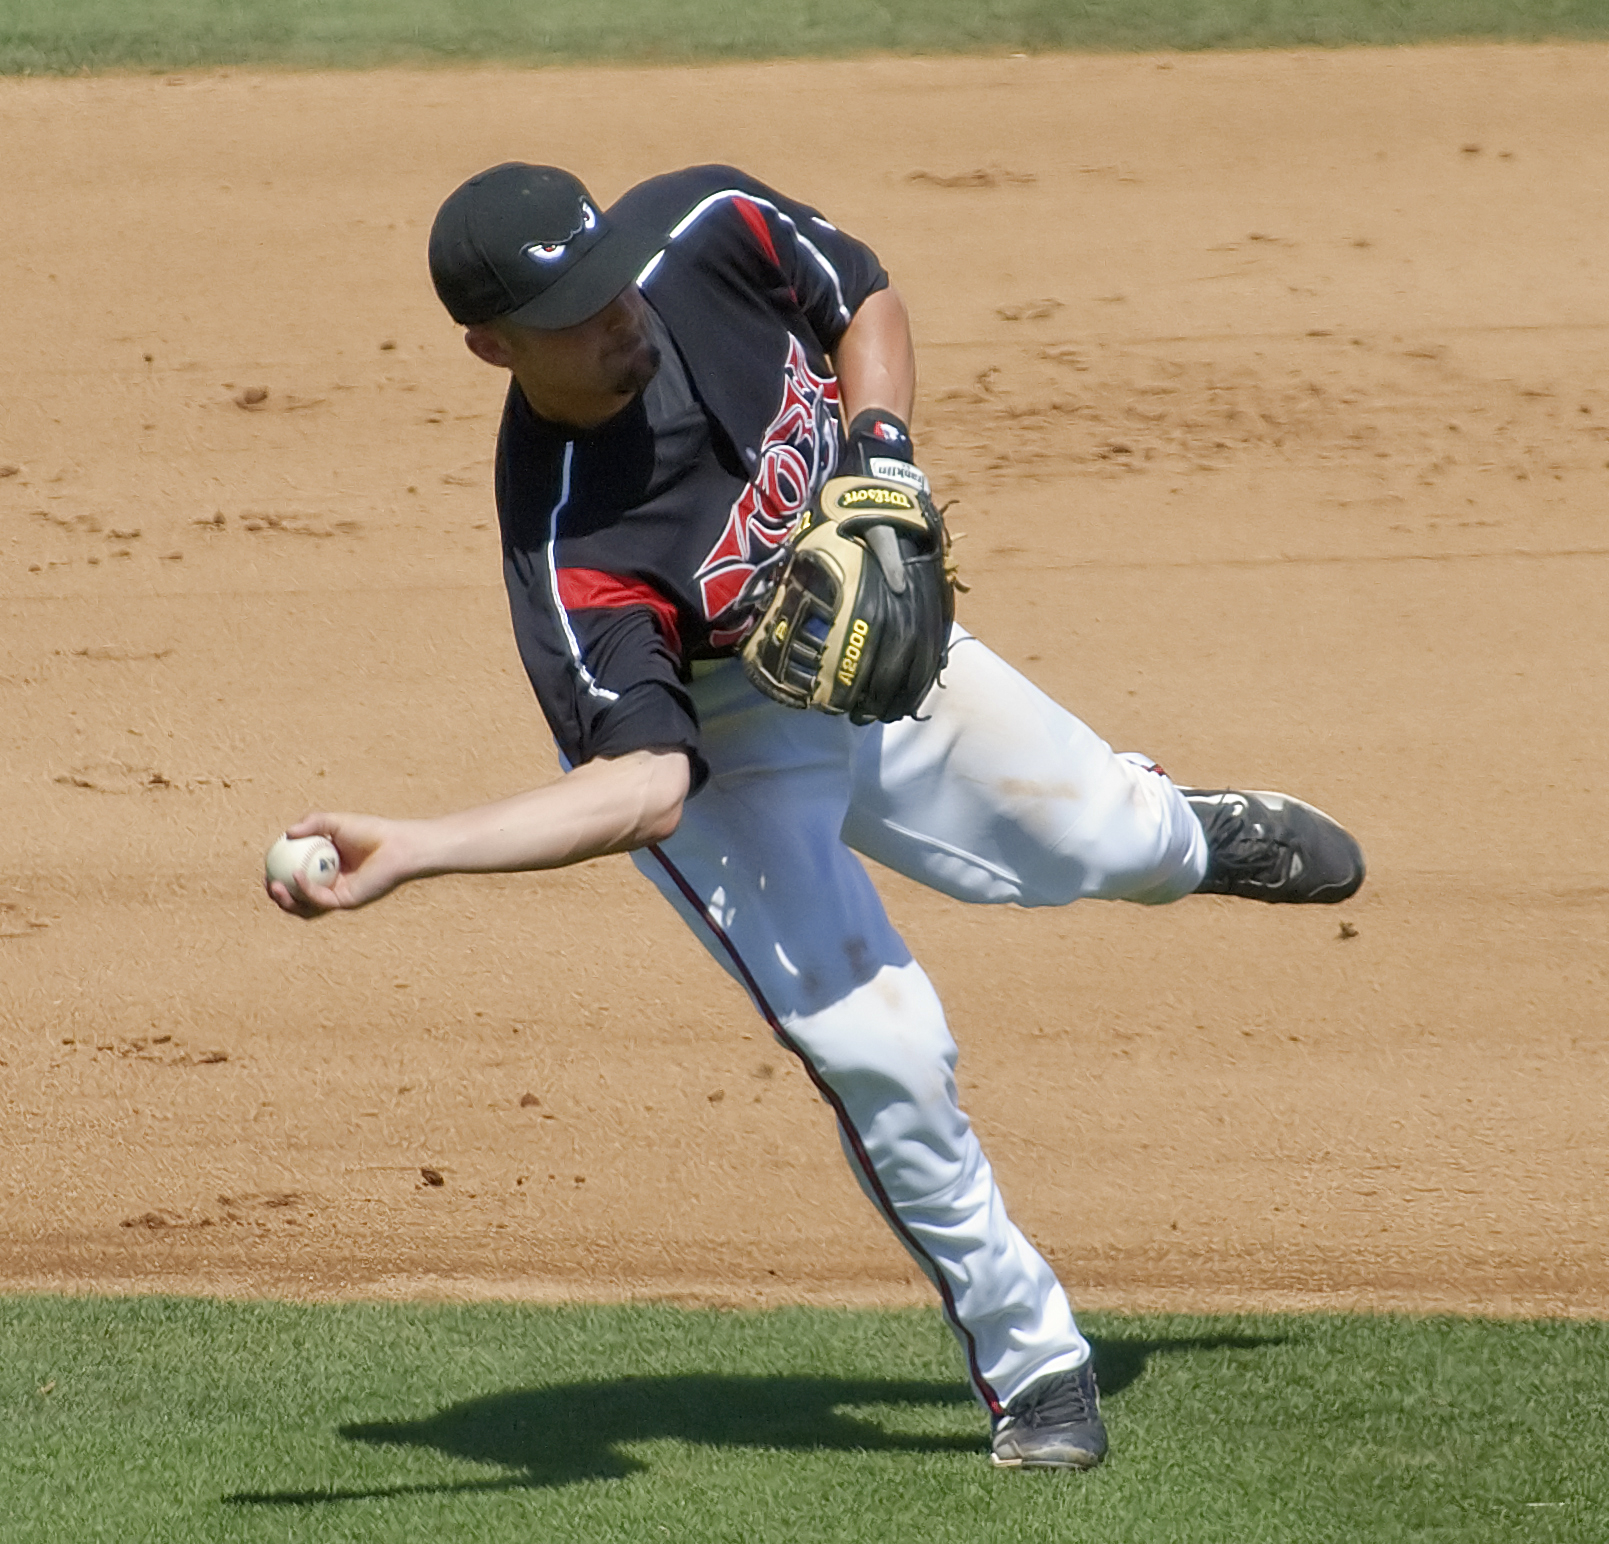 a pitcher in the motion of throwing the ball